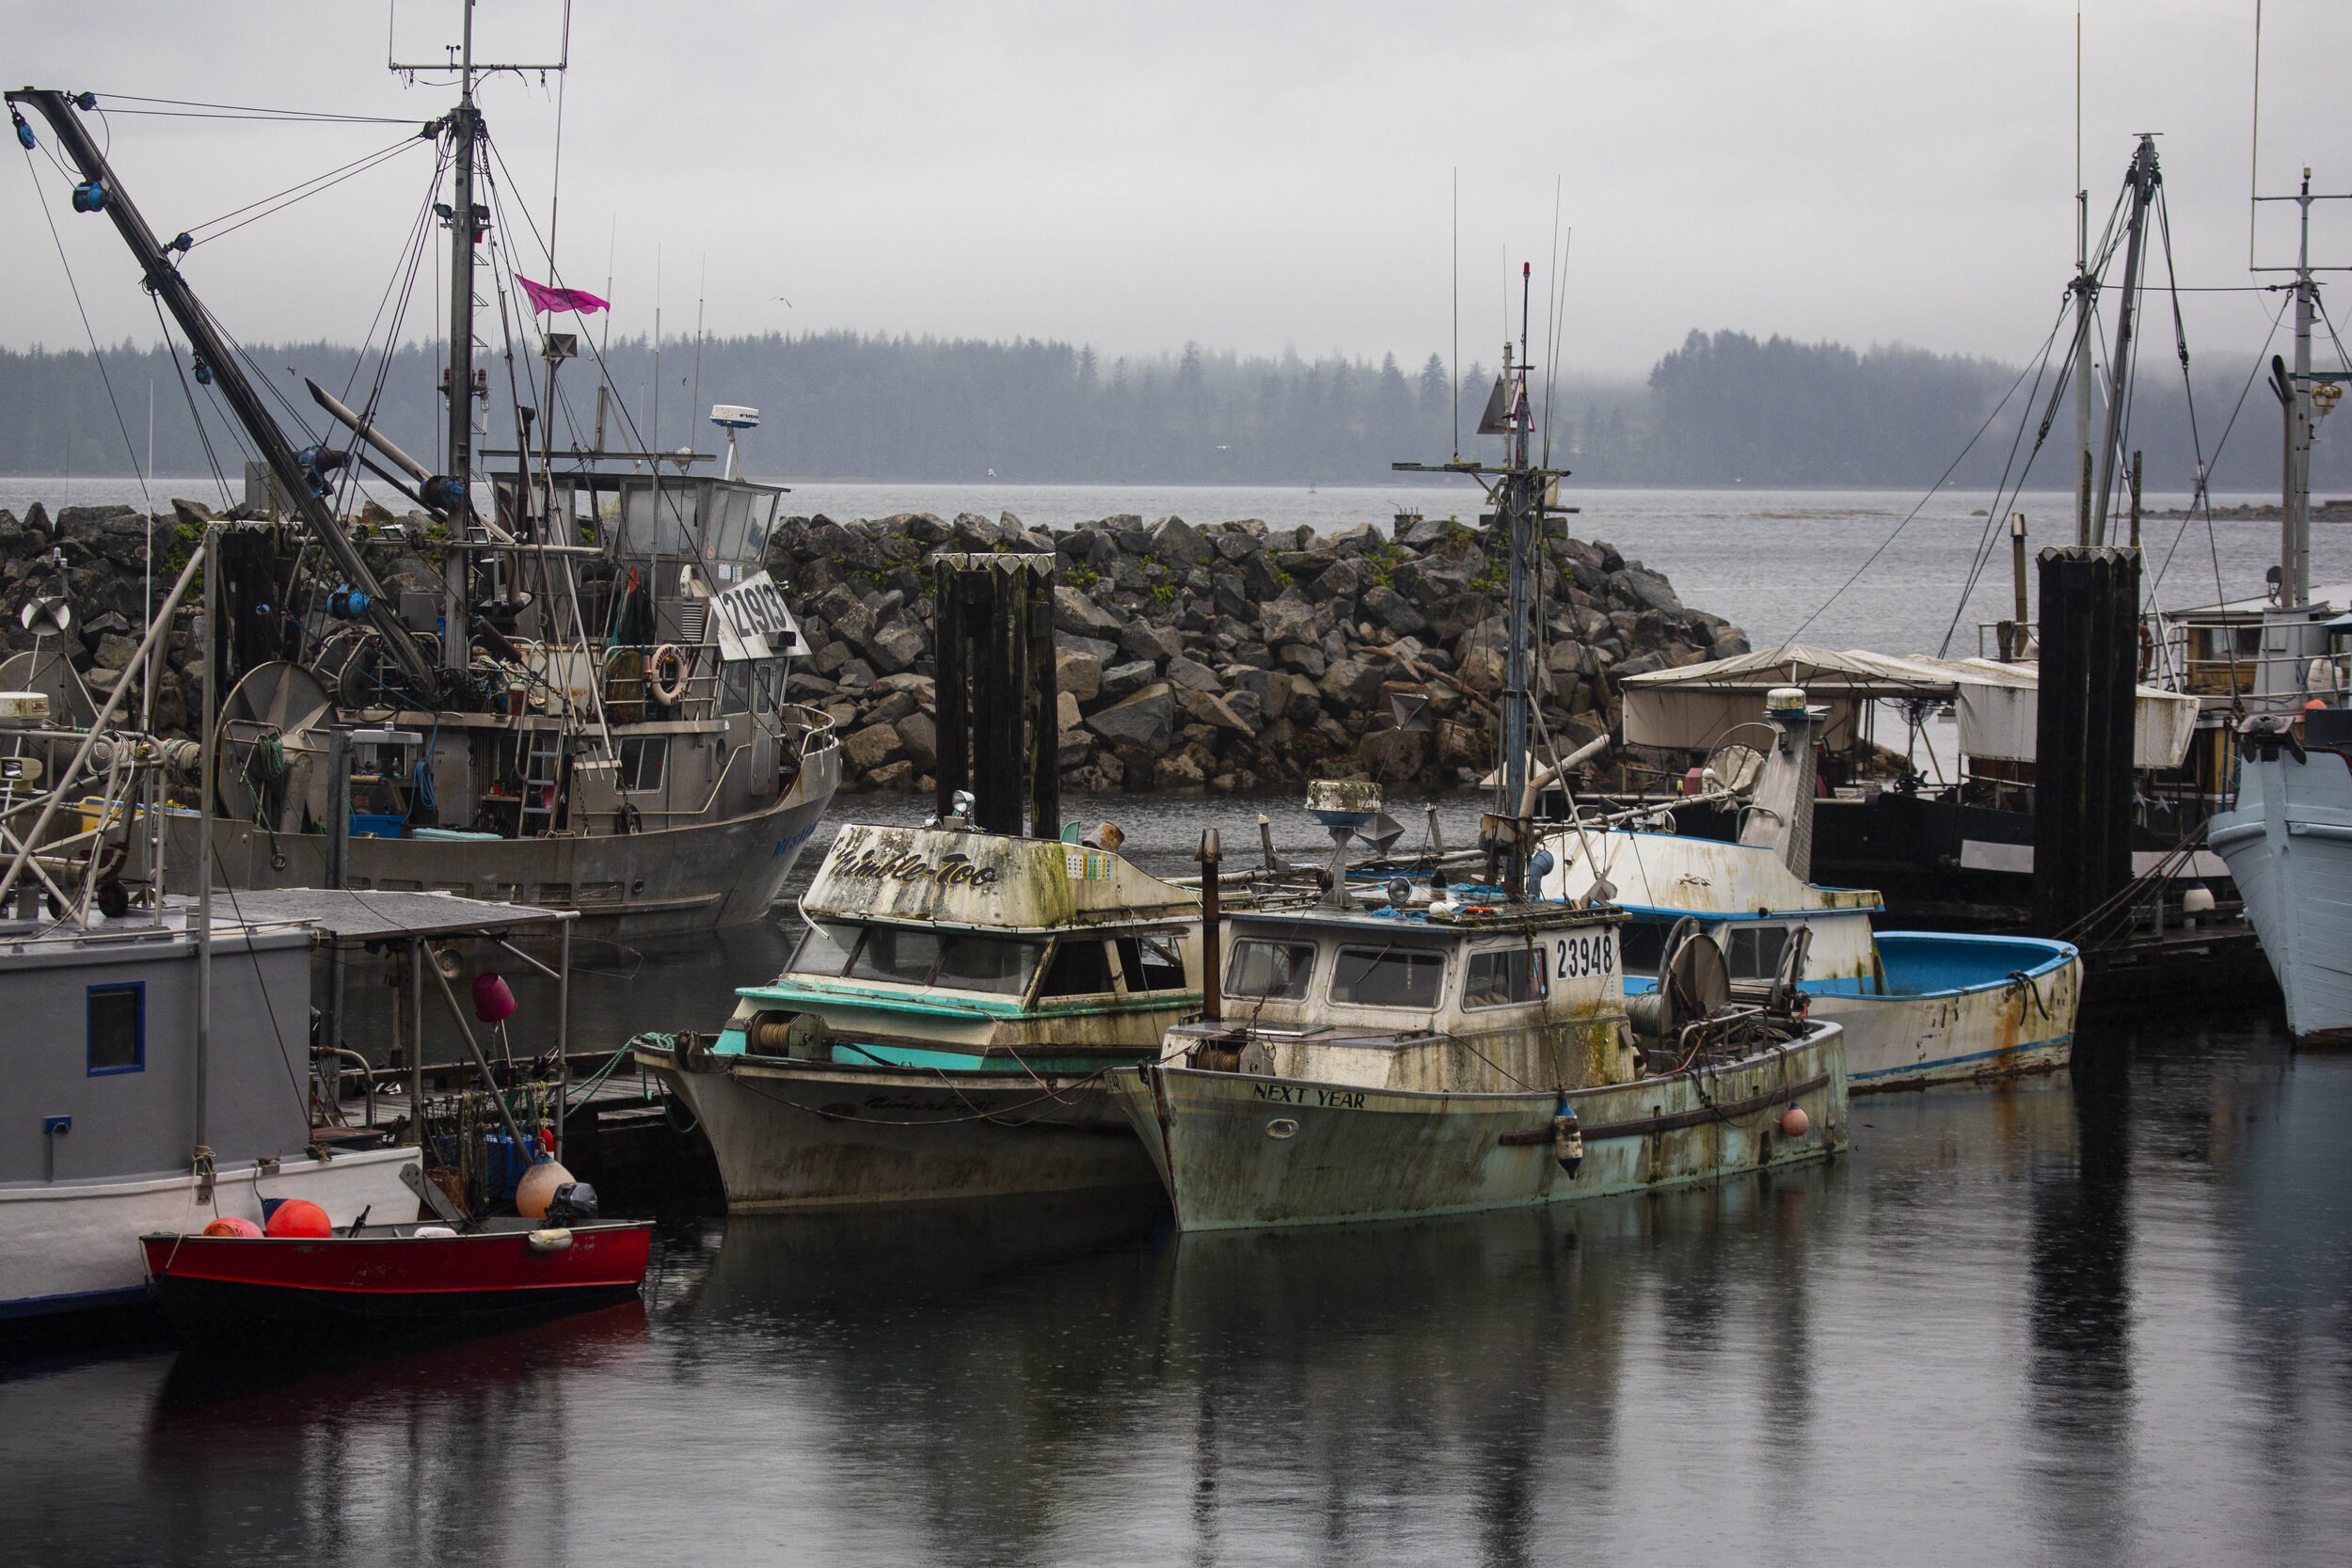  Commercial fishing boats, many of them in disrepair in Alert Bay, BC, speaks to the decline of fishing opportunities in the region. Many Namgis members were commercial fishermen before the local fisheries were closed due to declining stocks of fish.